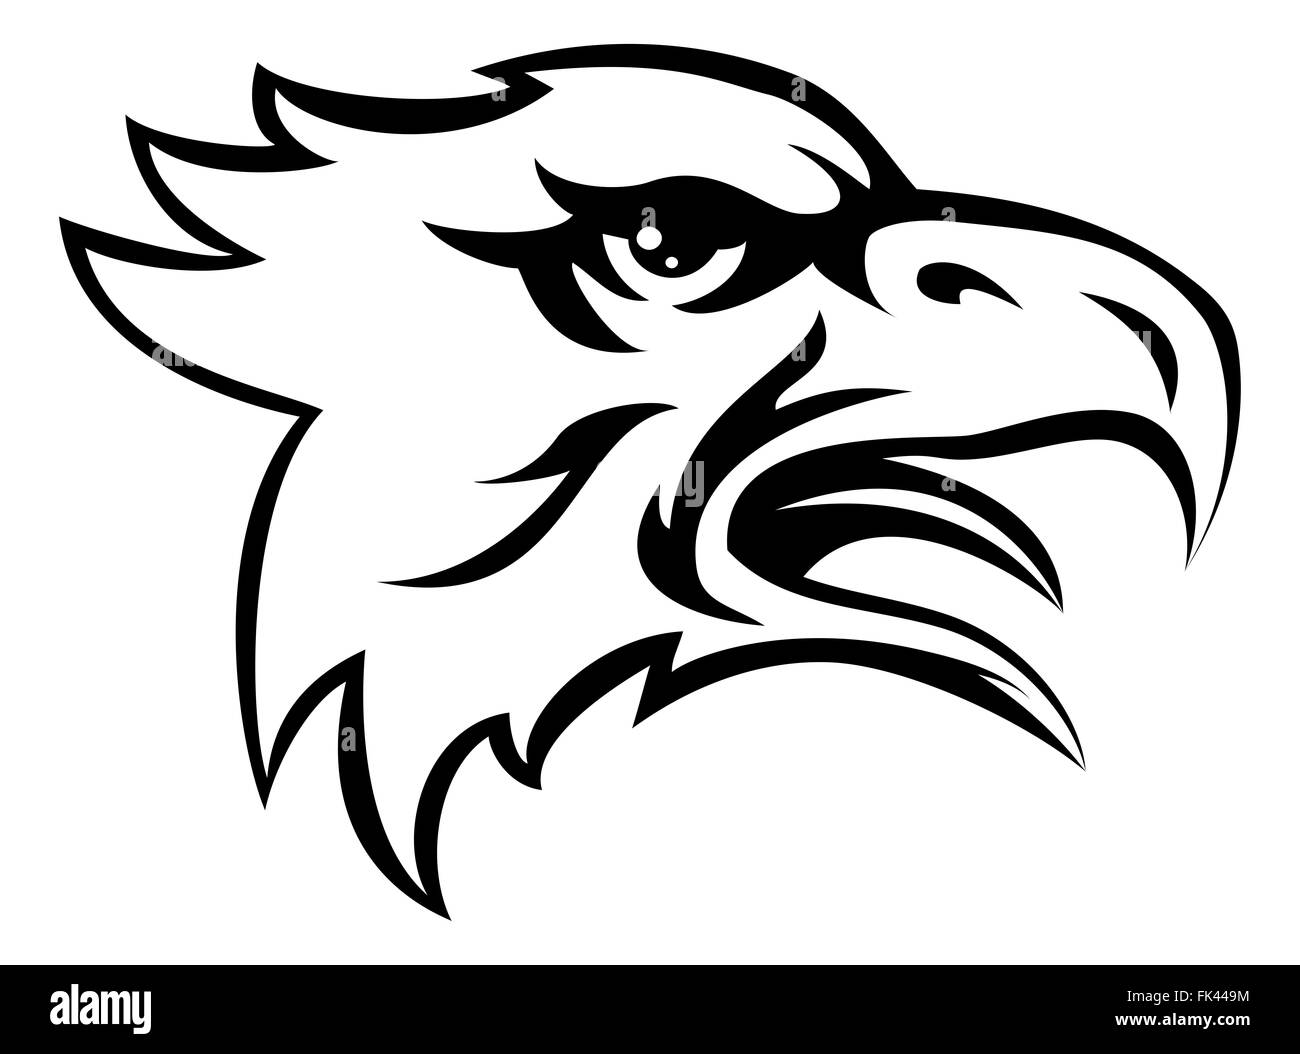 An illustration of a eagle animal mean sports mascot head Stock Photo